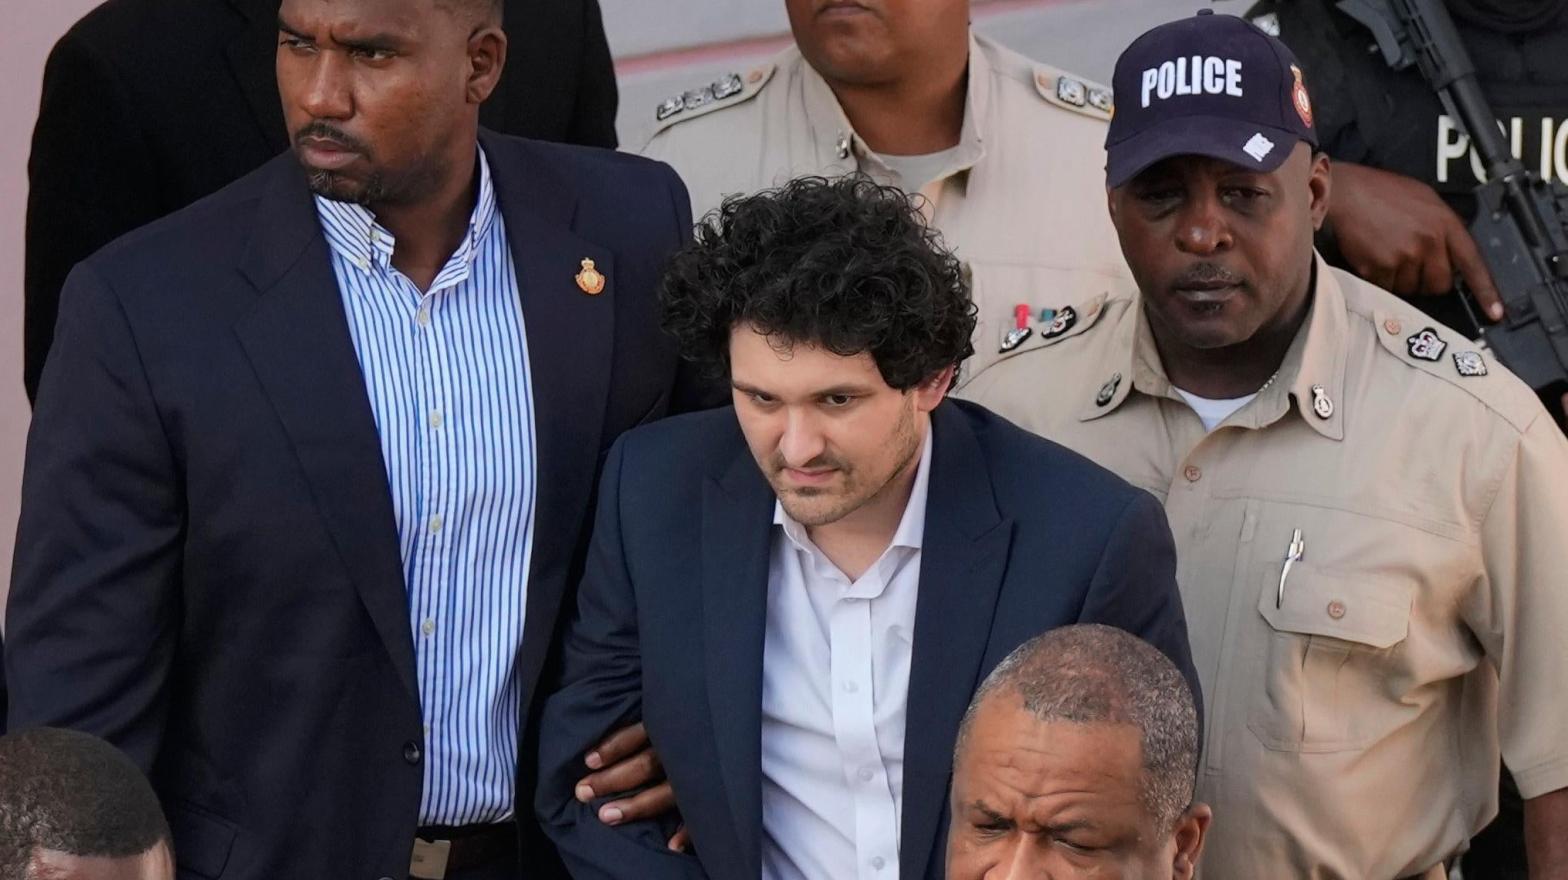 FTX founder Sam Bankman-Fried, centre, is escorted out of Magistrate Court following a hearing in Nassau, Bahamas on Dec. 19, 2022. (Photo: Rebecca Blackwell, AP)